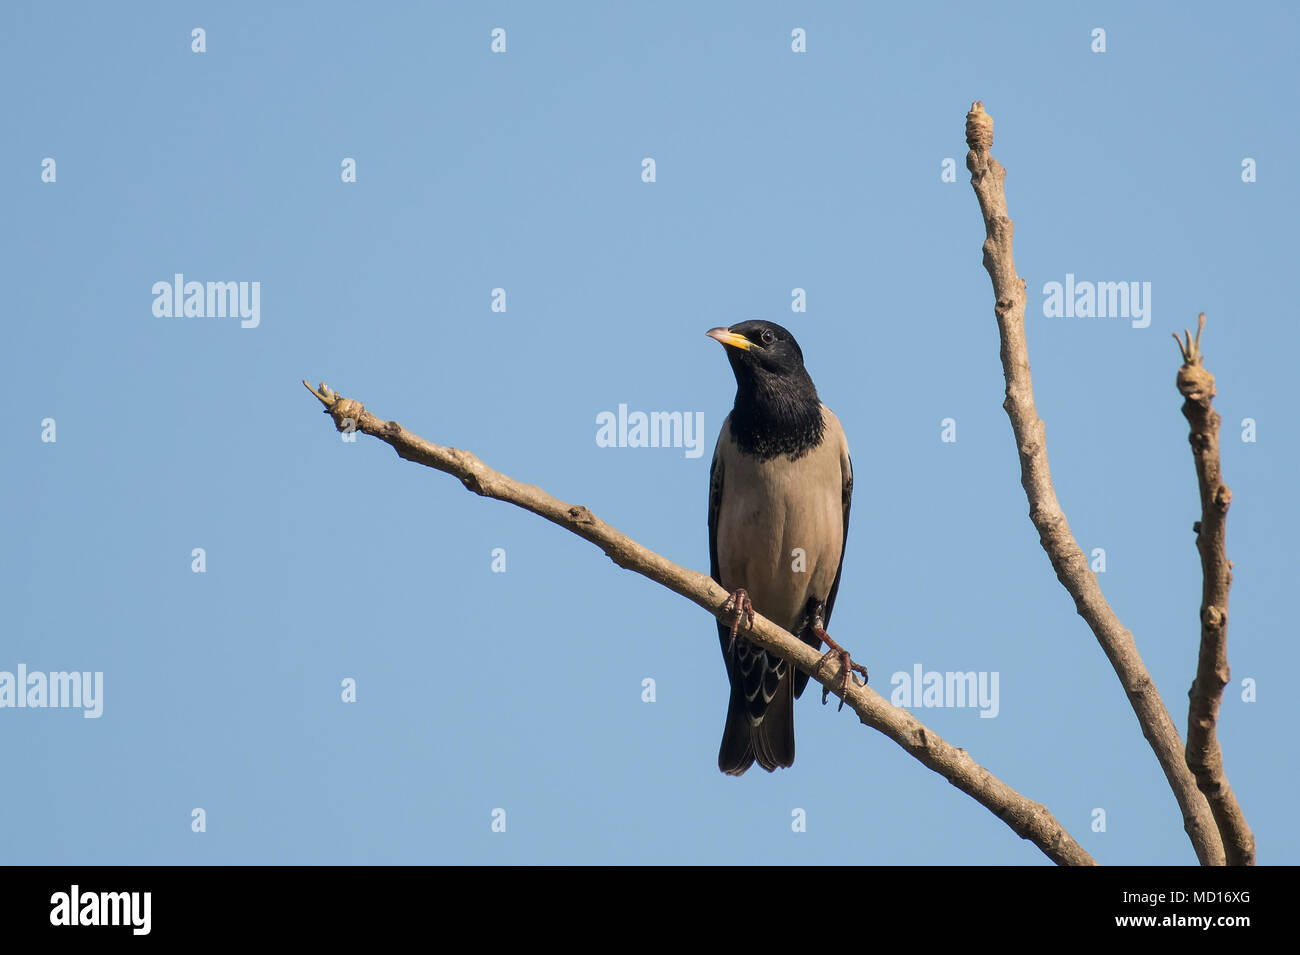 Bird: Portrait of a Male Rosy Starling Perched on a Tree Branch Stock Photo